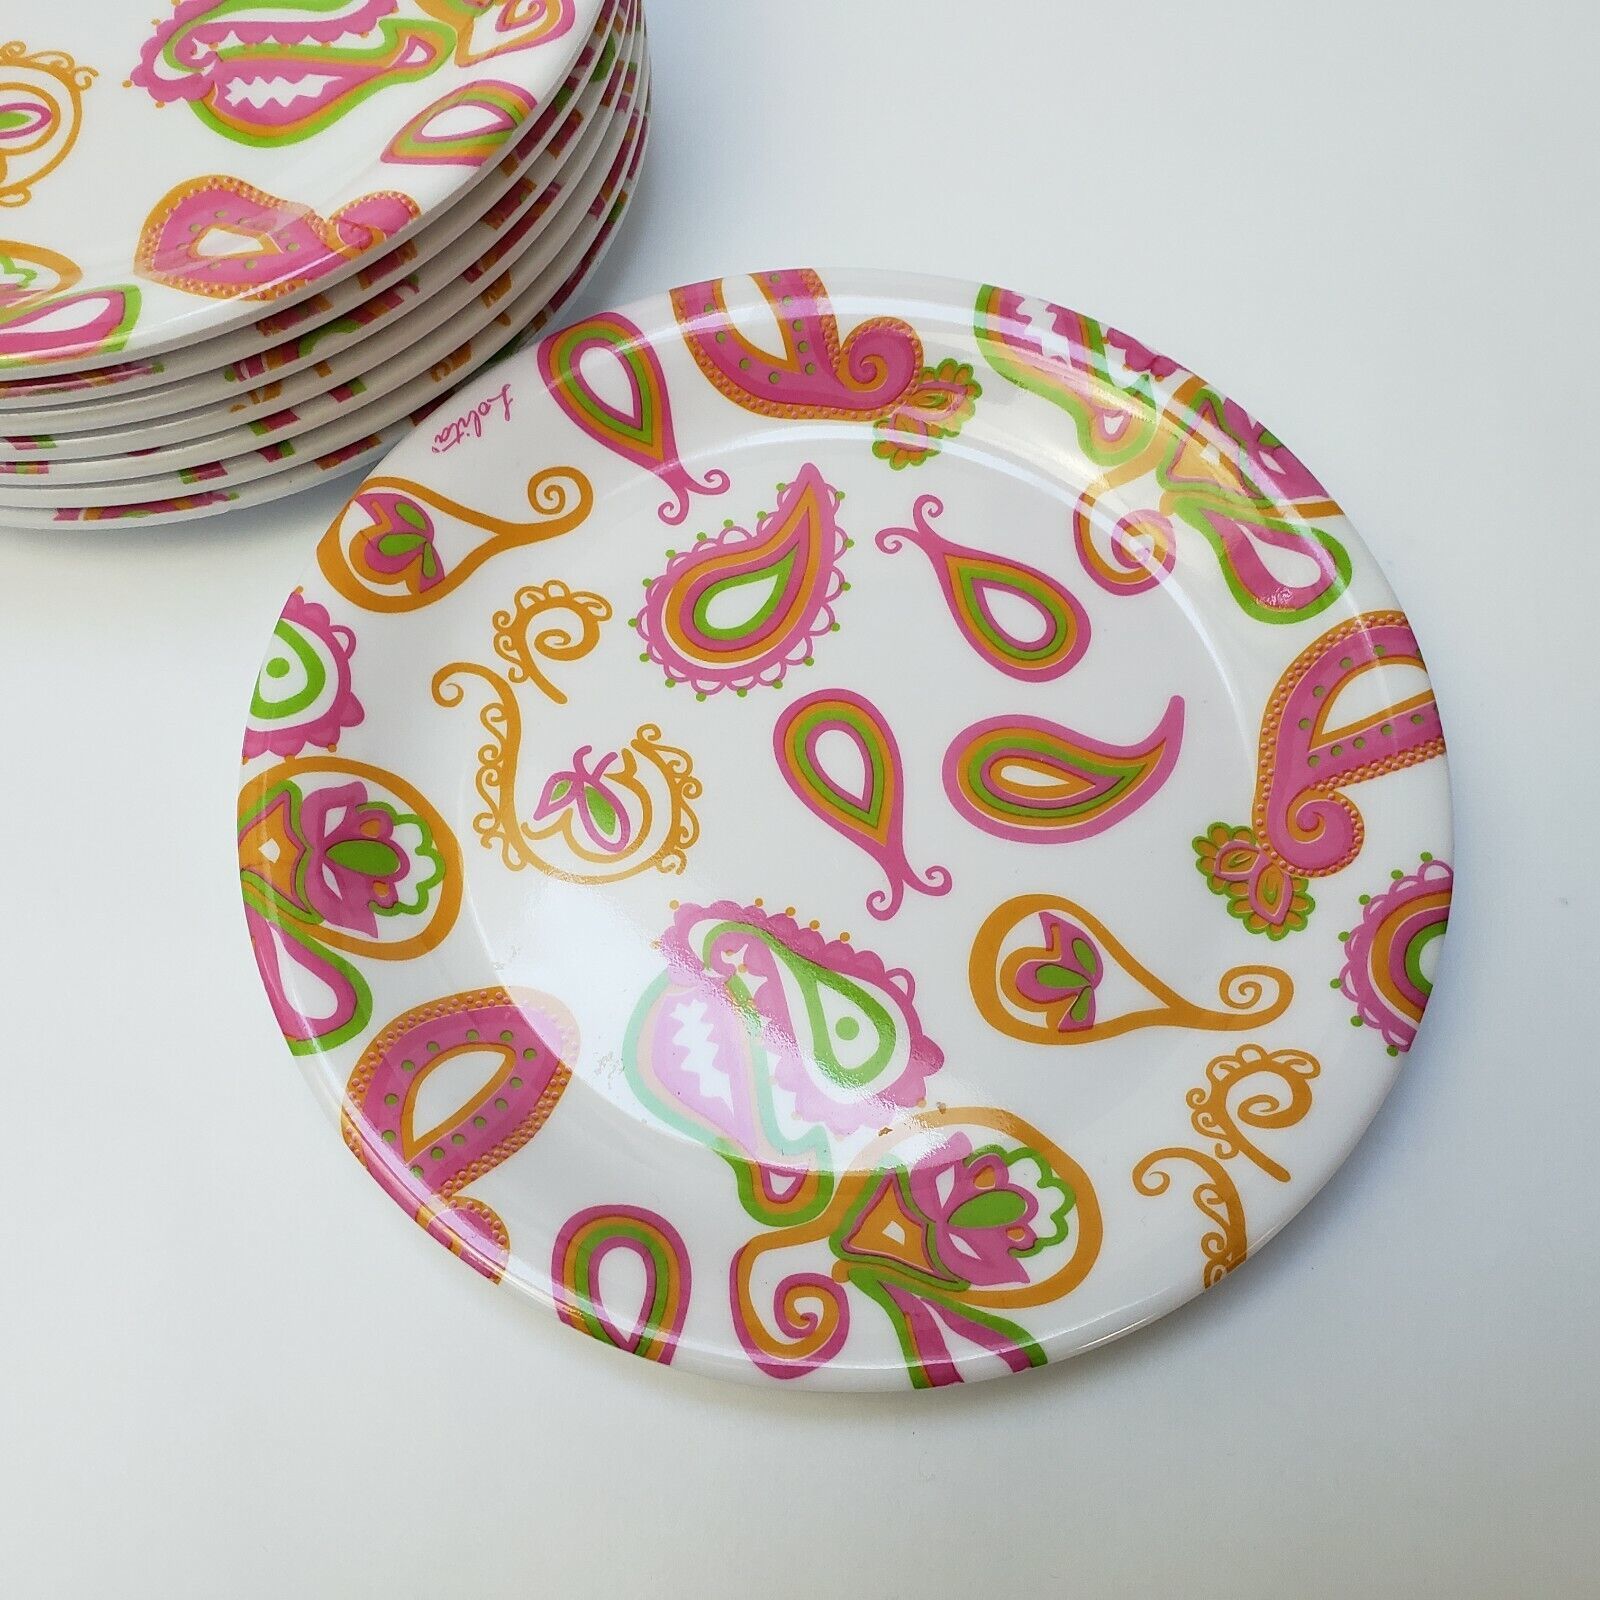 Lolita Dessert Plates (9) What is Your Moment Paisley Design Pink Multi-Color - $17.77